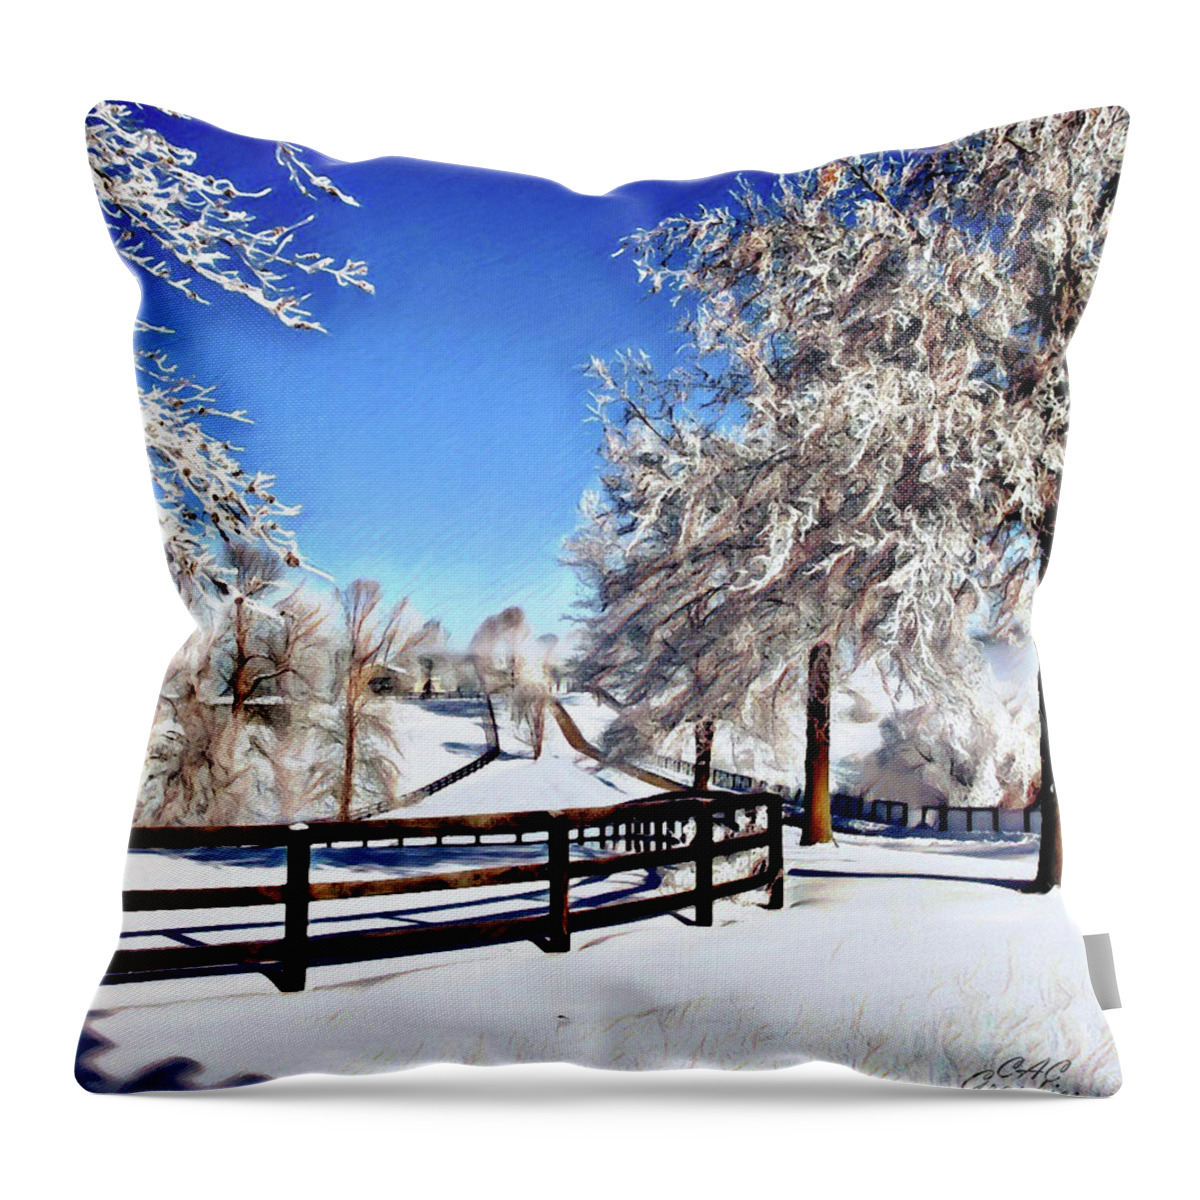 Snow Throw Pillow featuring the digital art Wintry Lane by CAC Graphics